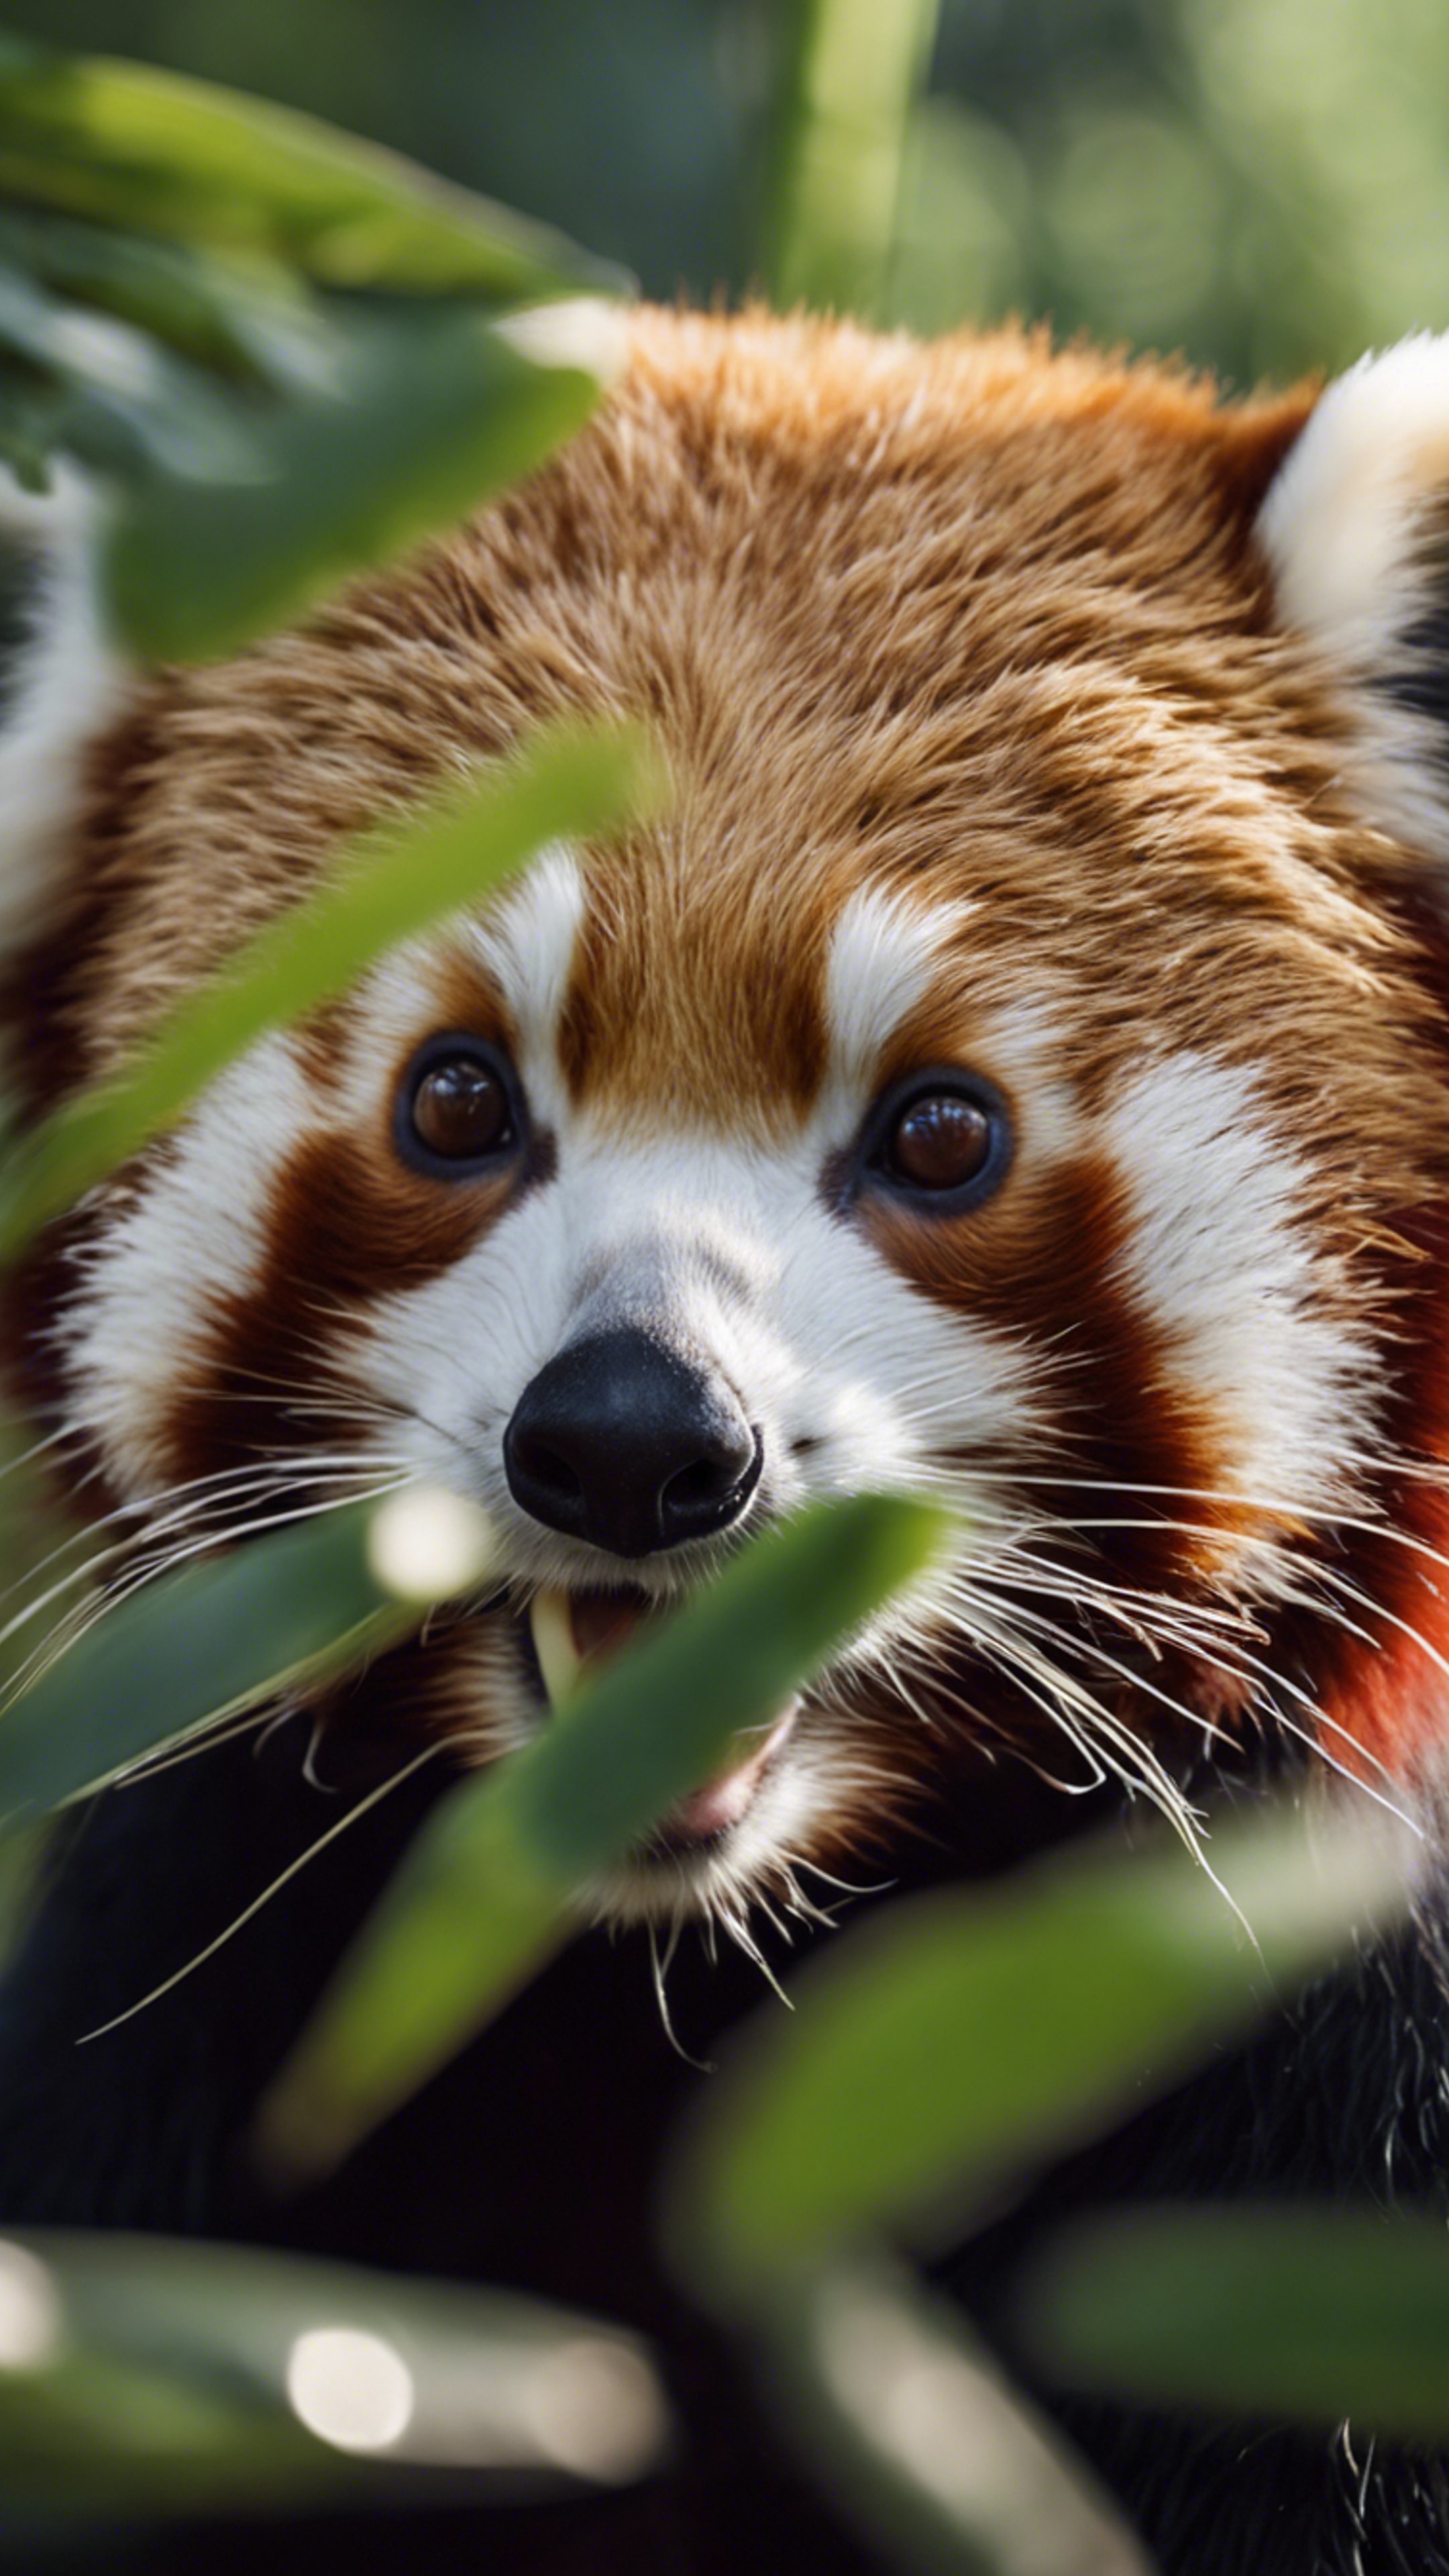 A close-up of a red panda munching on bamboo leaves Tapet[20c4a1c4fccc4fa88325]